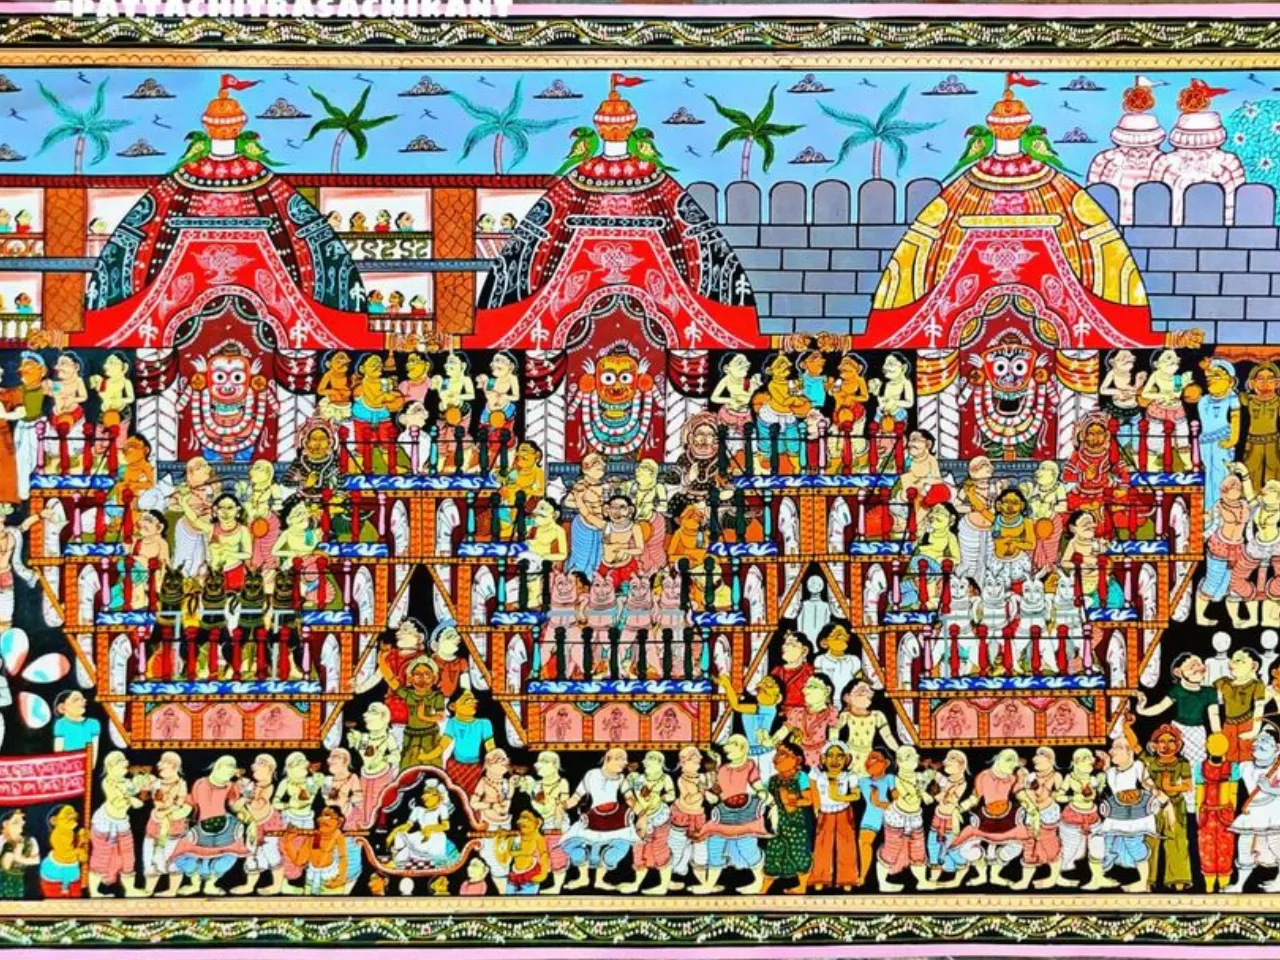 This Utkal Divas, let's celebrate the Pattachitra Painting of Odisha